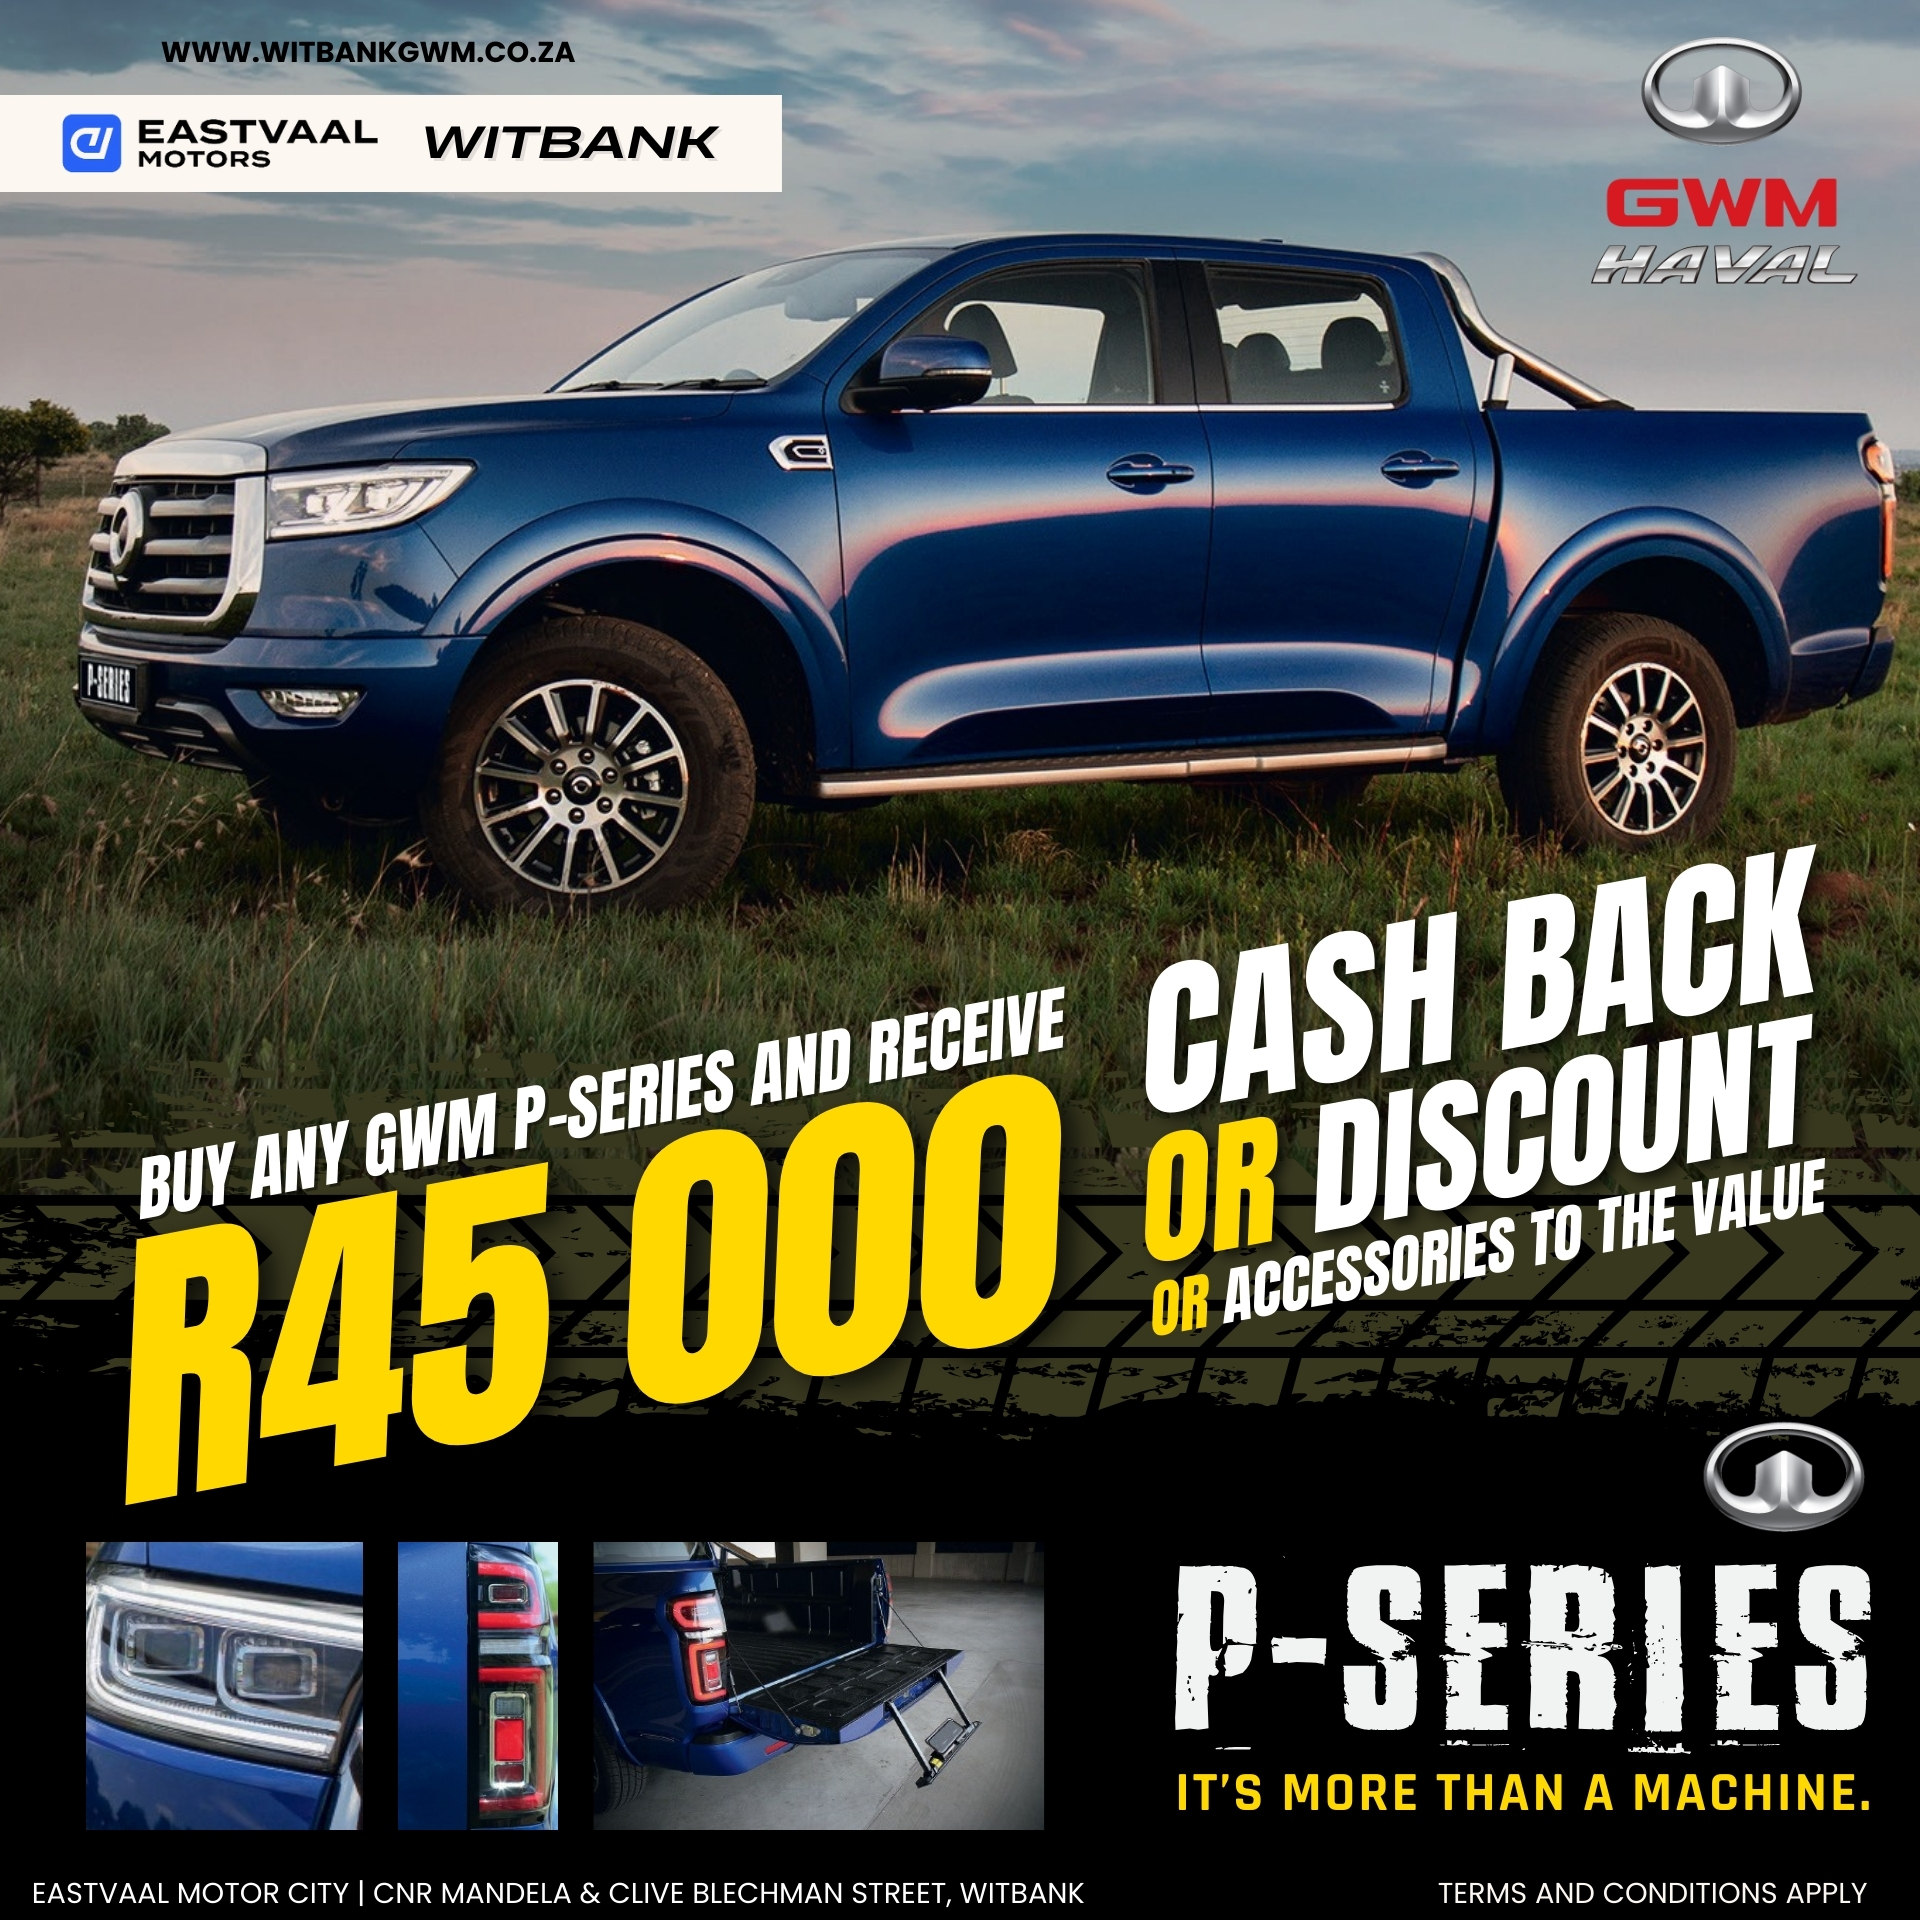 Buy any GWM P-Series this April image from Eastvaal Motors